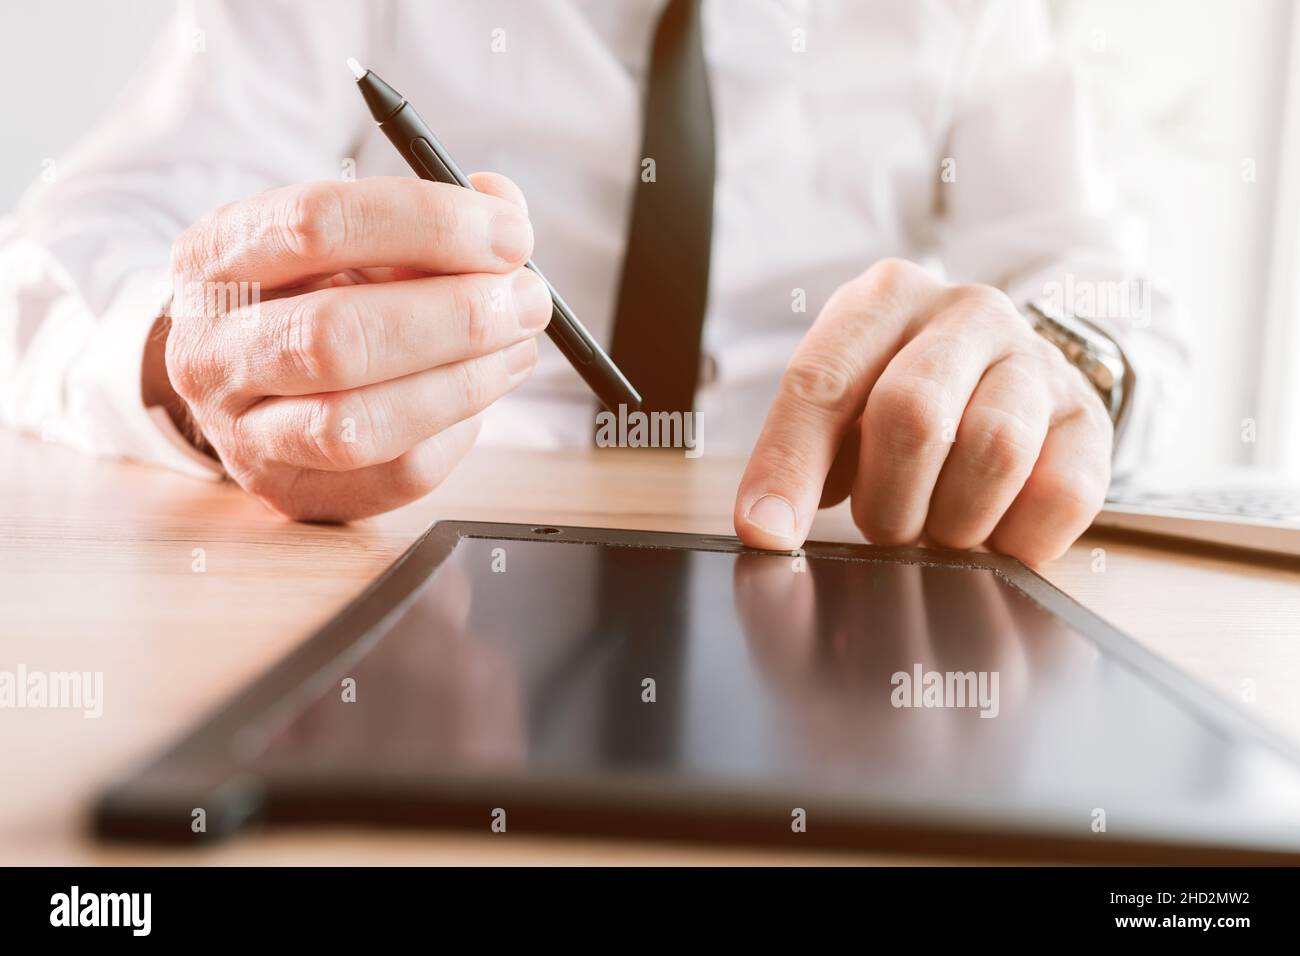 Employer offers stylus pen for electronic signature or e-sign of employment contract agreement in office, selective focus Stock Photo